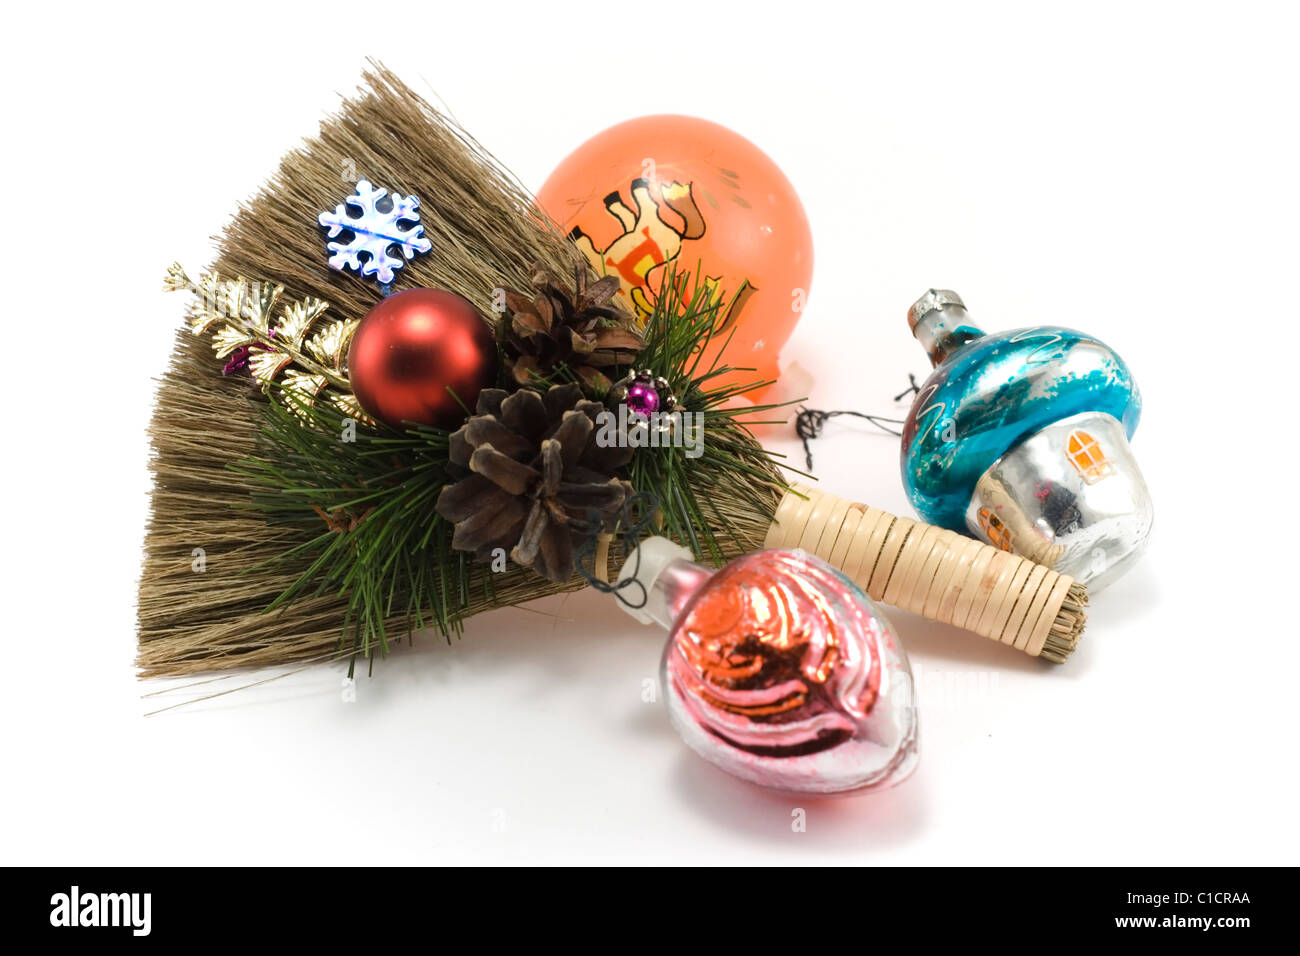 Cristmas, besom, embellishment for ated insulated on white background Stock Photo